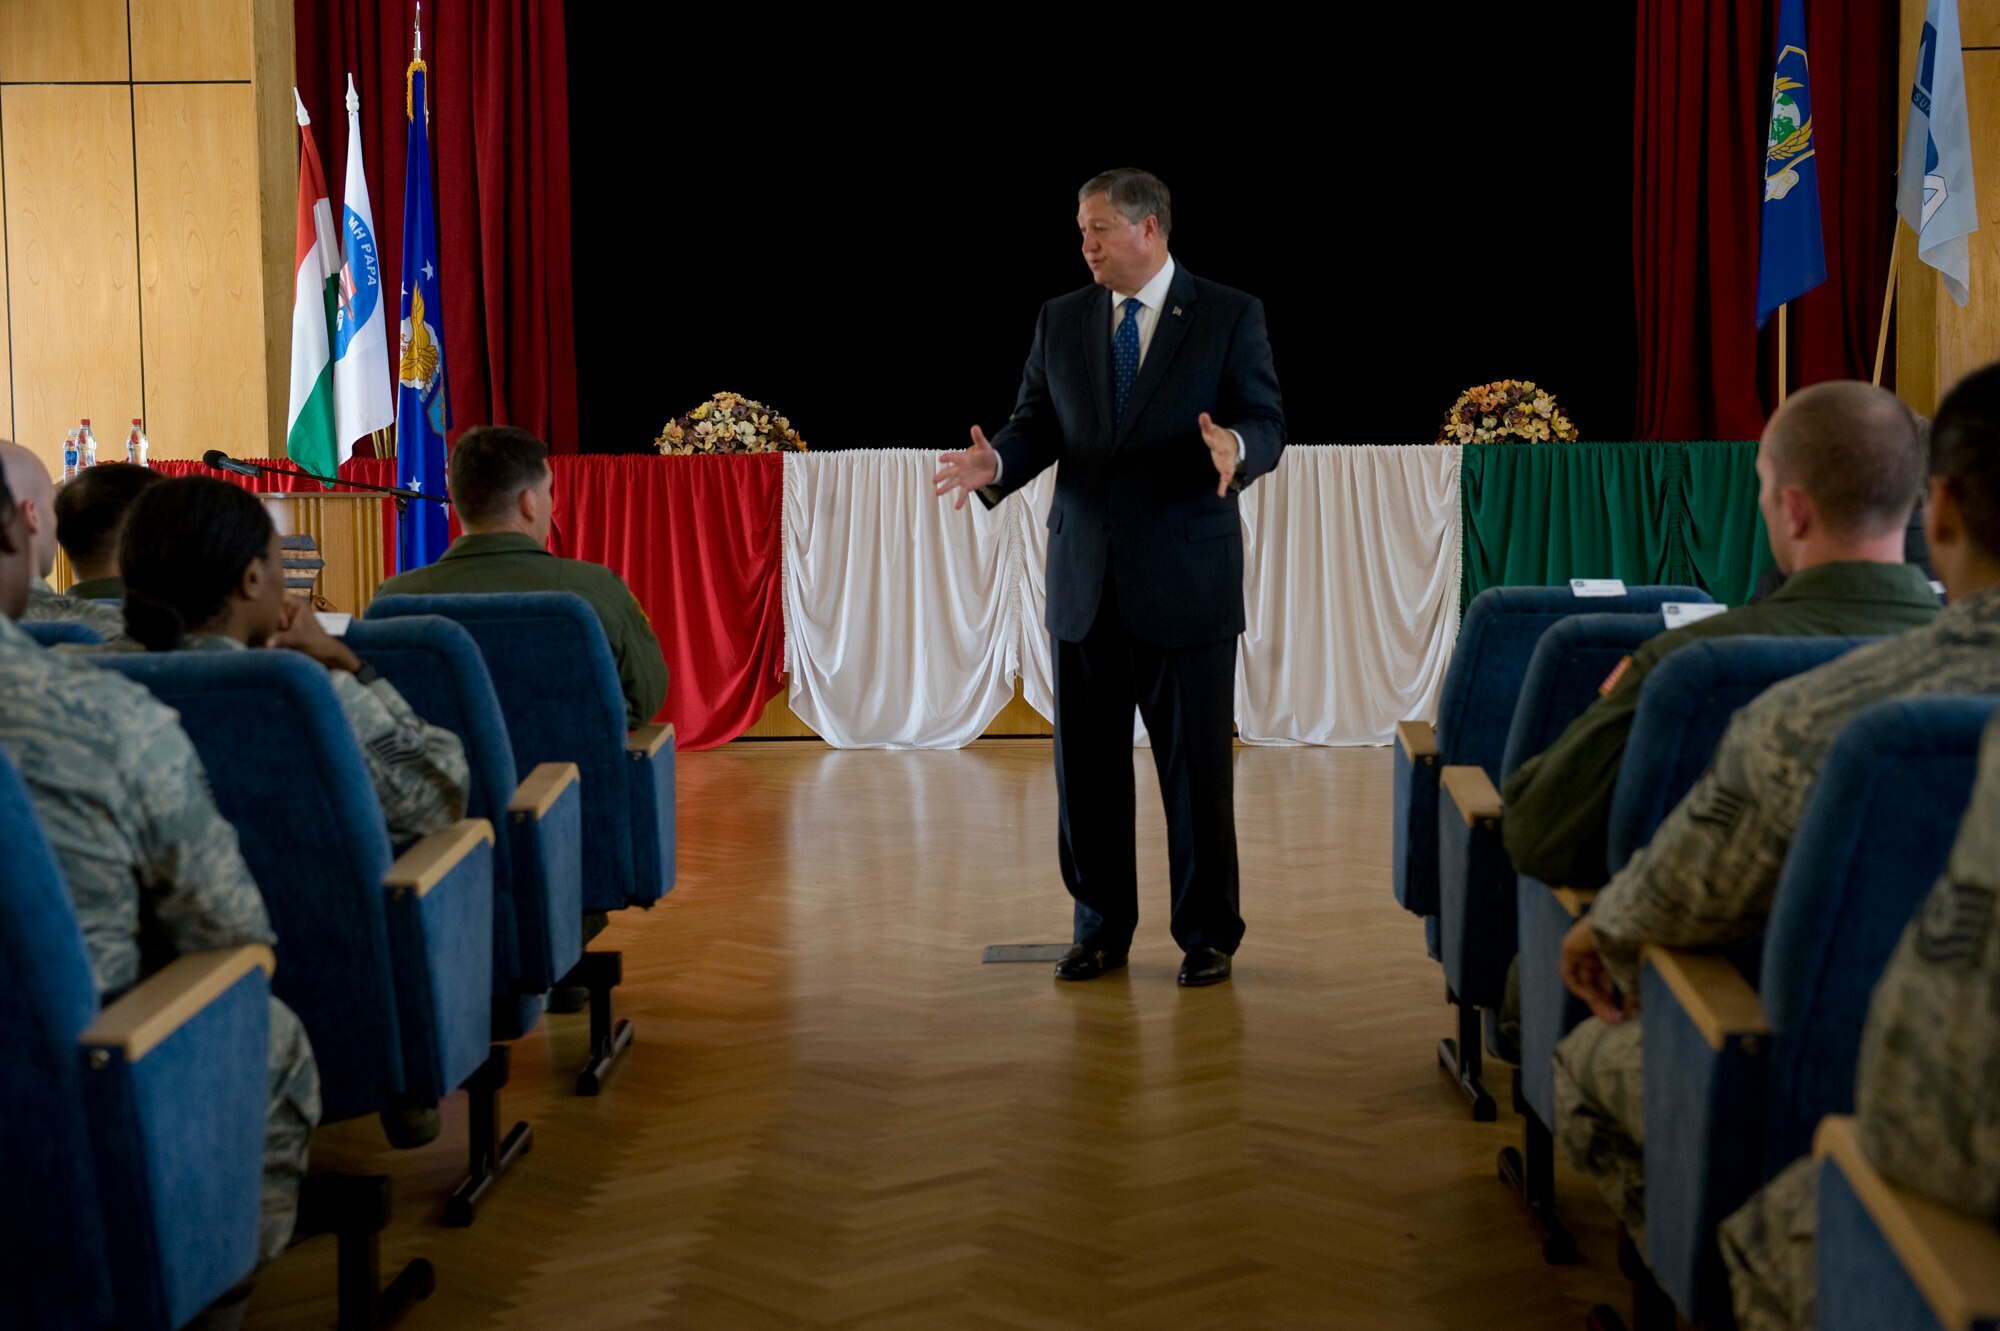 Secretary of the Air Force Michael Donley addresses Airmen and their spouses during an "all call" at the Cultural Center at Pápa Air Base, Hungary, July 11, 2012. The secretary visited the Heavy Airlift Wing to speak with Airmen about the direction of the Air Force, meet with them on the job and learn what's on their minds. (U.S. Air Force photo/Master Sgt. Wayne Clark)